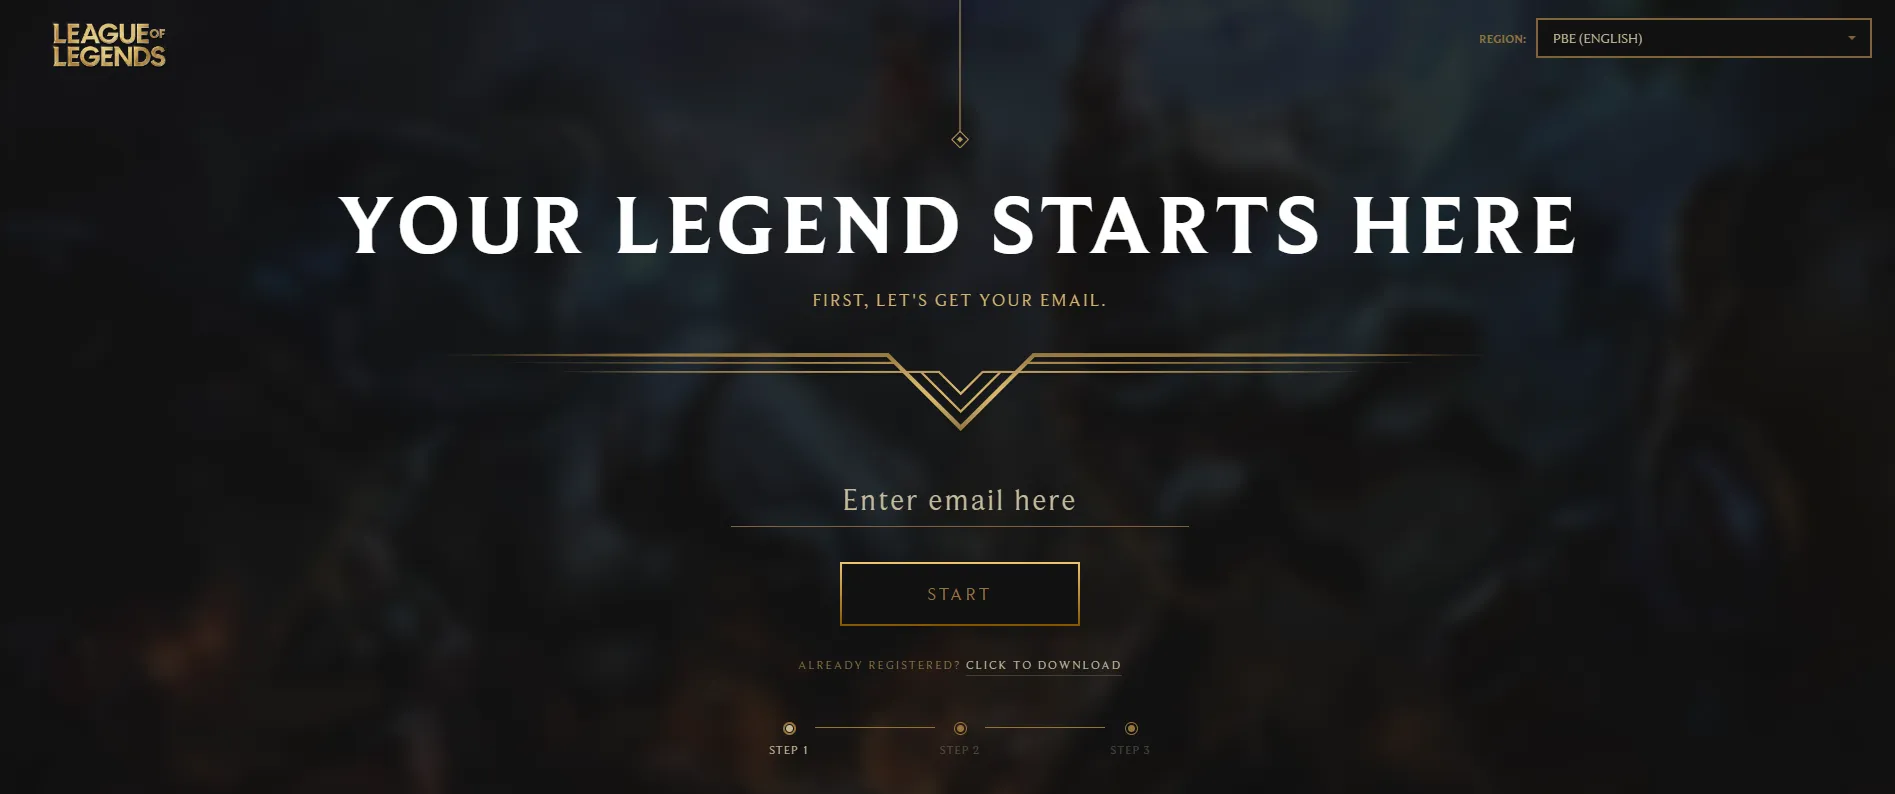 How to create a League of Legends PBE Account?